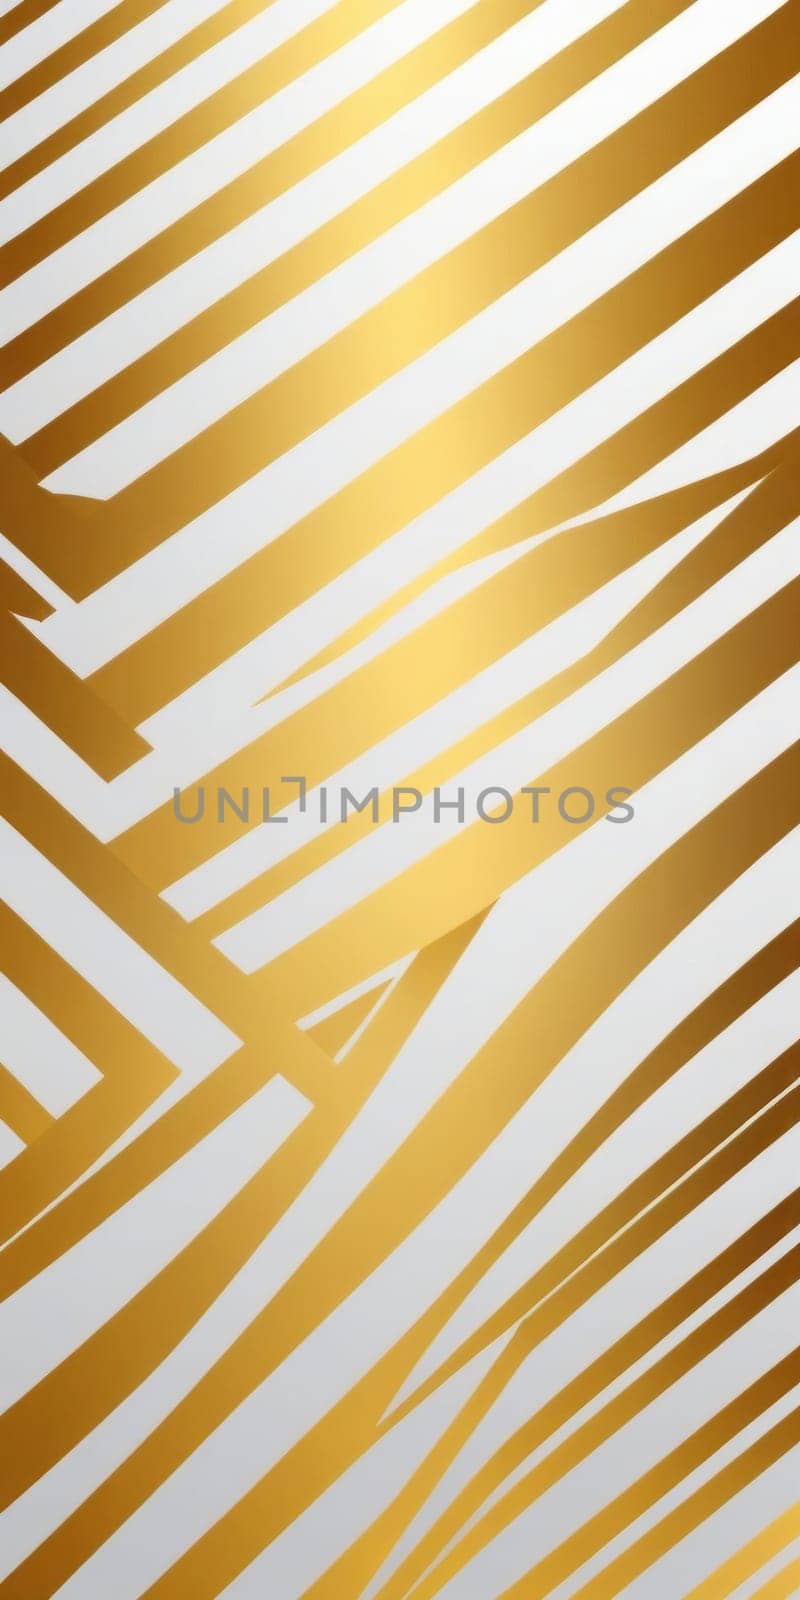 Striped Shapes in White and Gold by nkotlyar